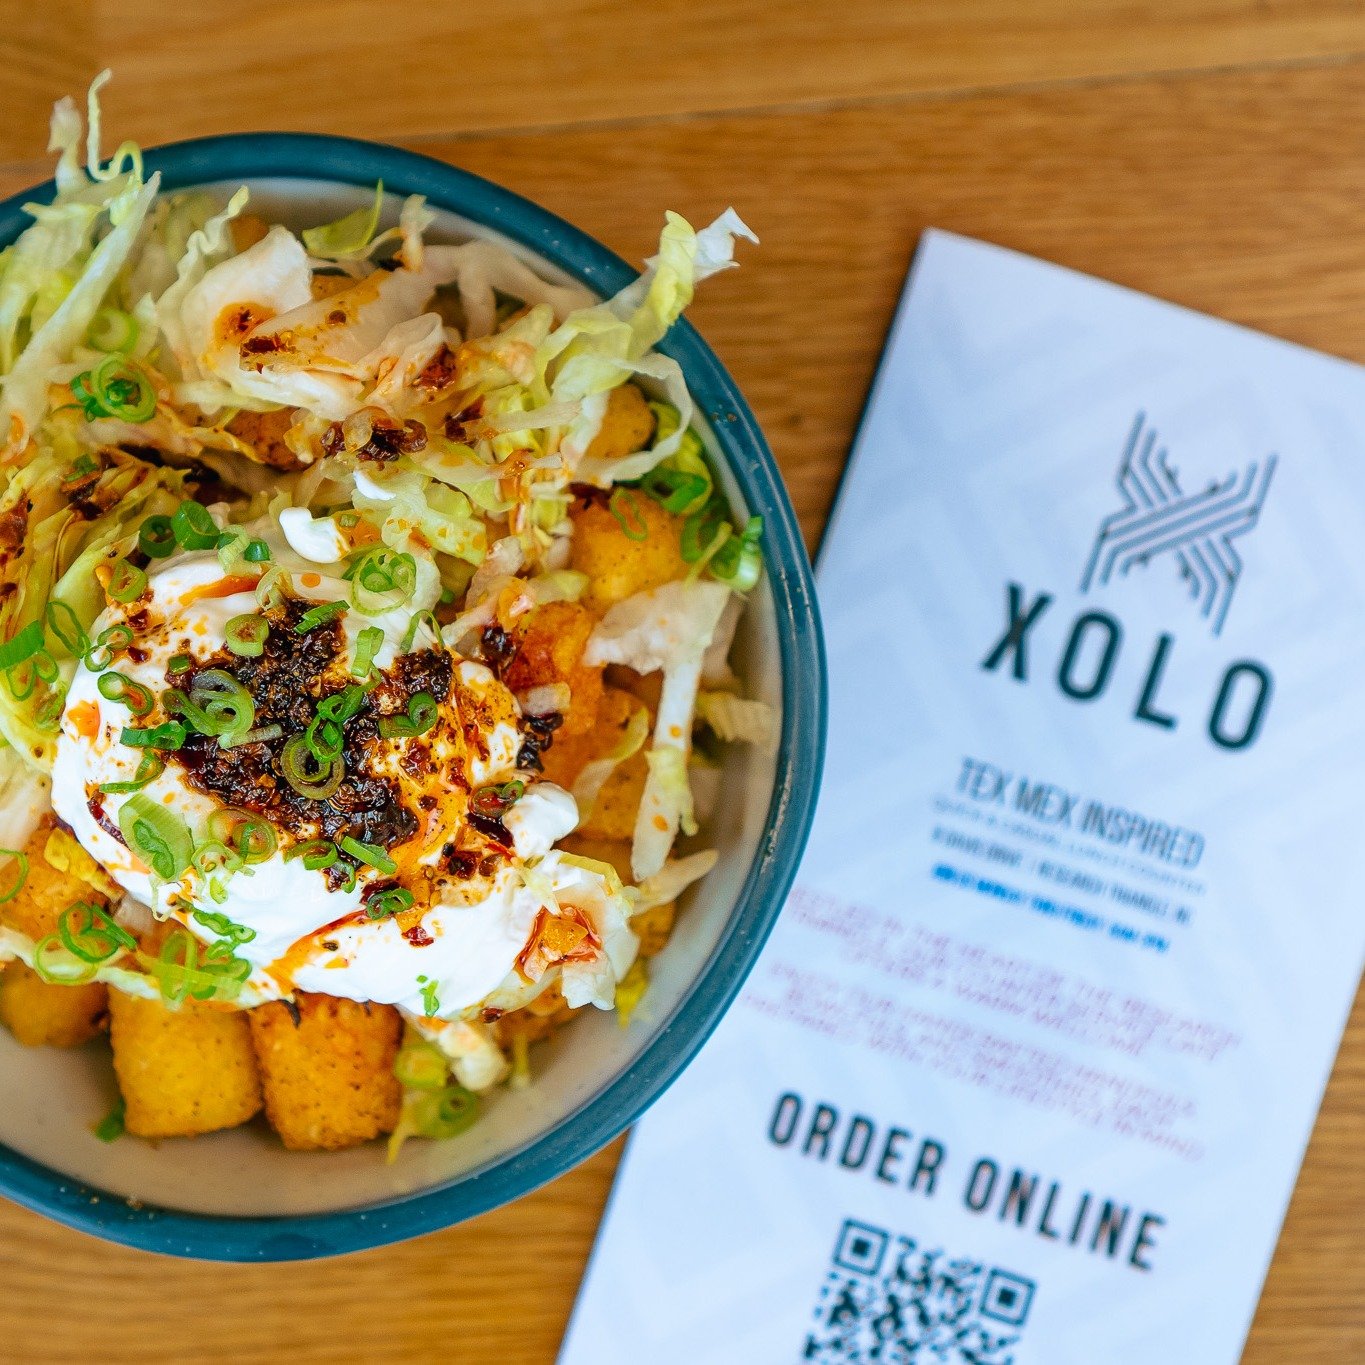 Spice up your day with our FIESTA TOTS at Xolo 🌶🎉 Crispy tots topped with Latin chili crisp, shredded lettuce, and a dollop of sour cream. Order online for pick-up! 🔥

Hit the link in our bio to join our Loyalty Program. Next time you stop in, sta